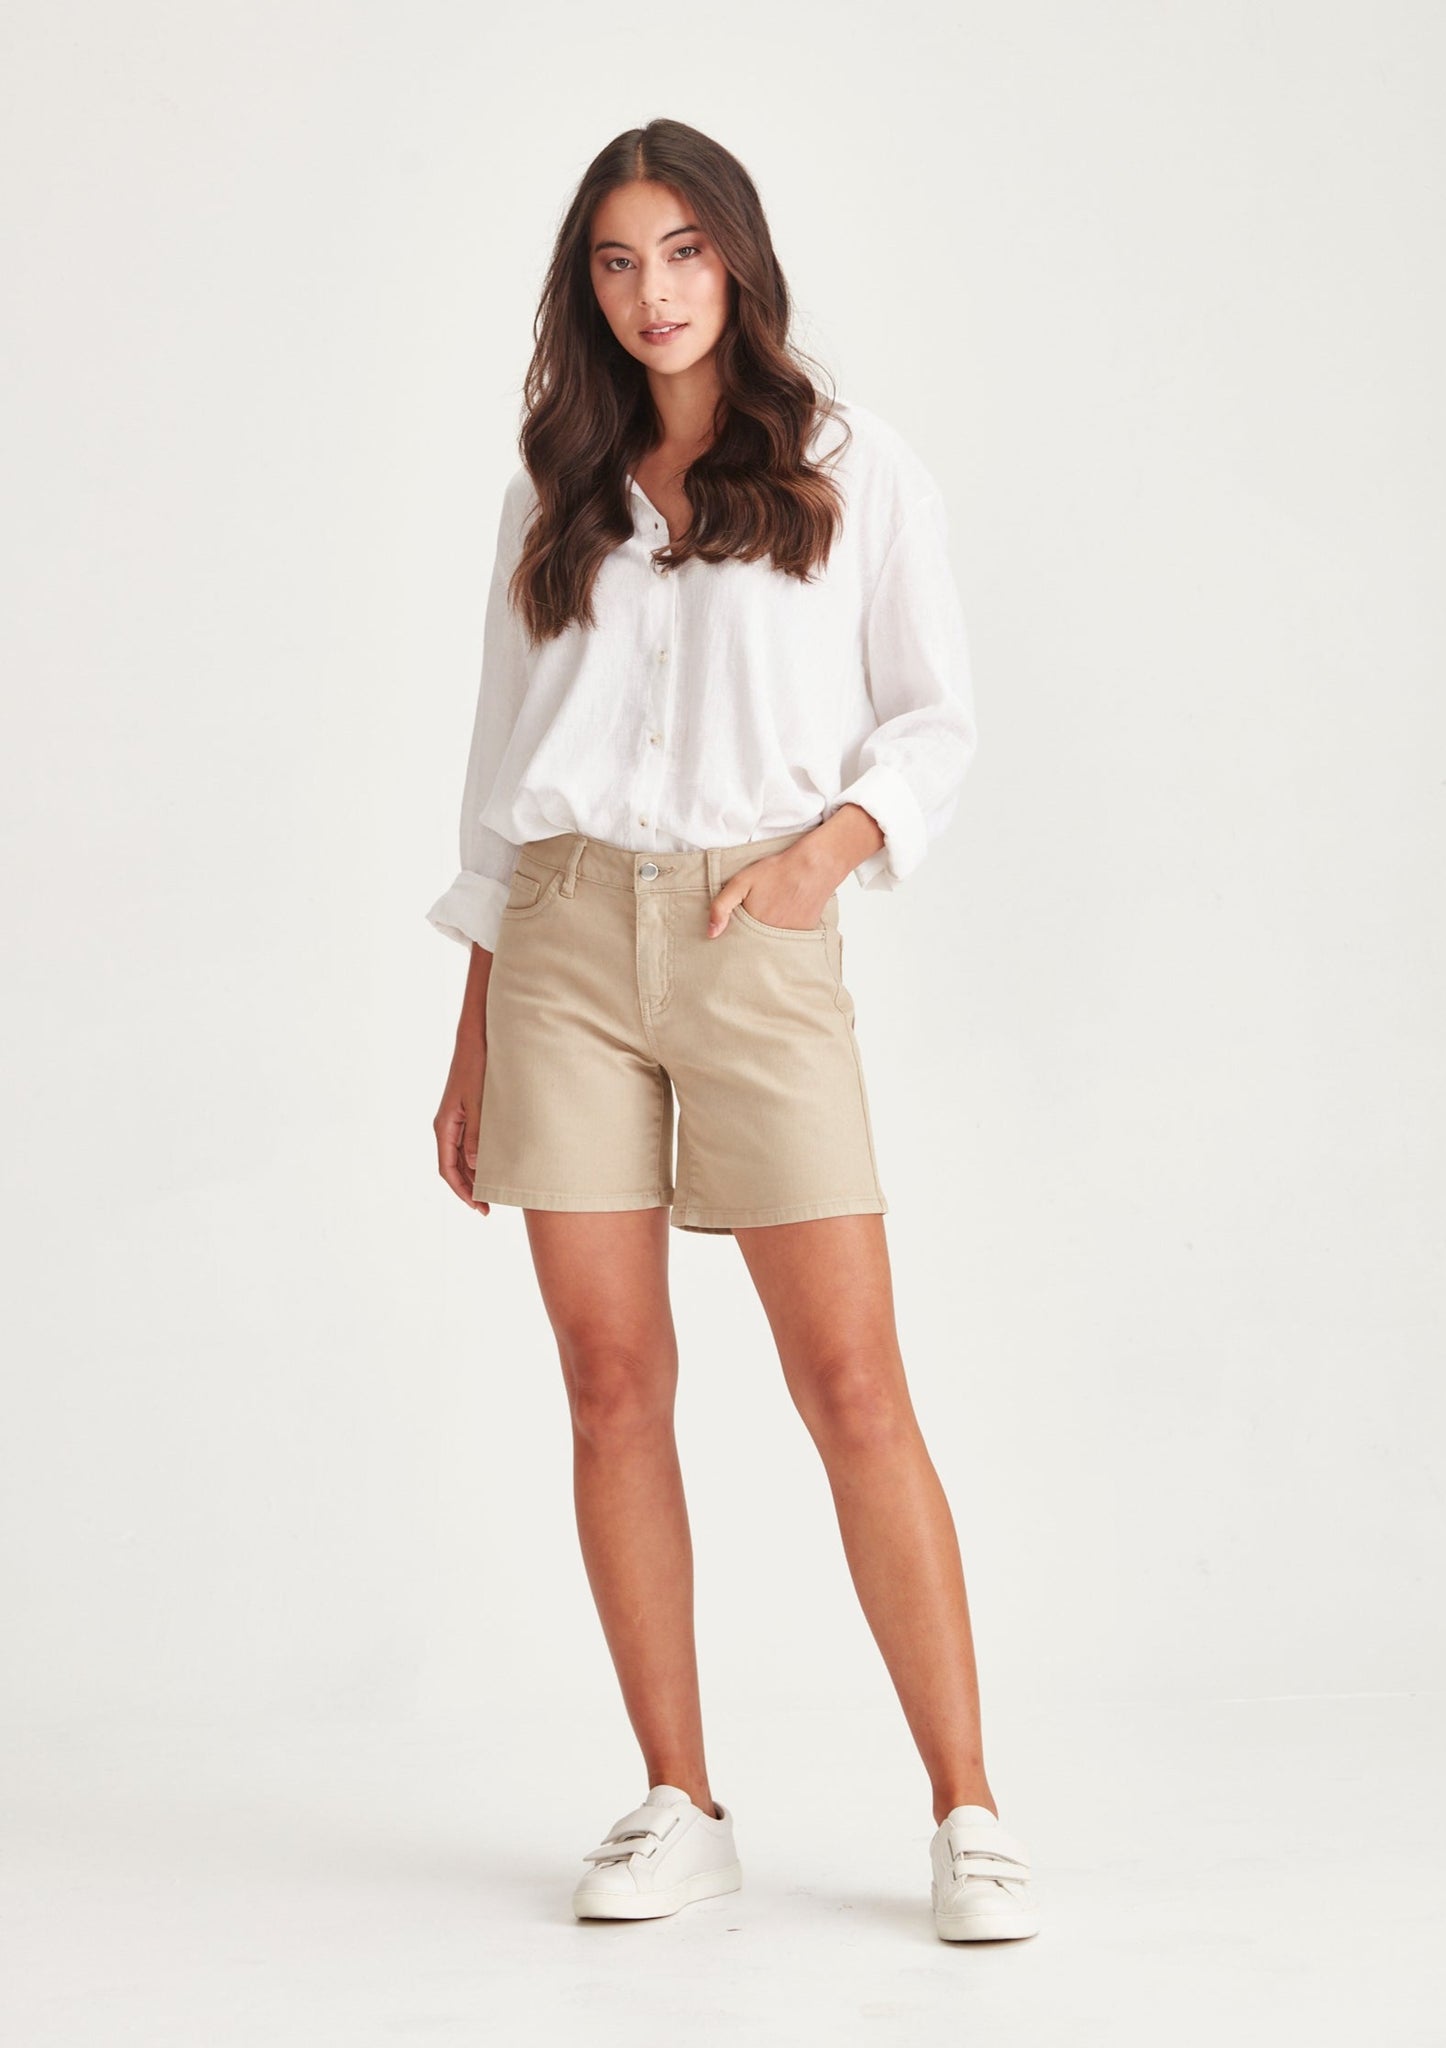 Danny Shorts - Light Khaki, by Junkfood Mid waisted long shorts in a stretch denim.  A relaxed 'everyday' Summer short in the perfect length.  Fixed waist band, belt loops, 95% cotton, 5% spandex, zip fly, classic 5 pocket design. 